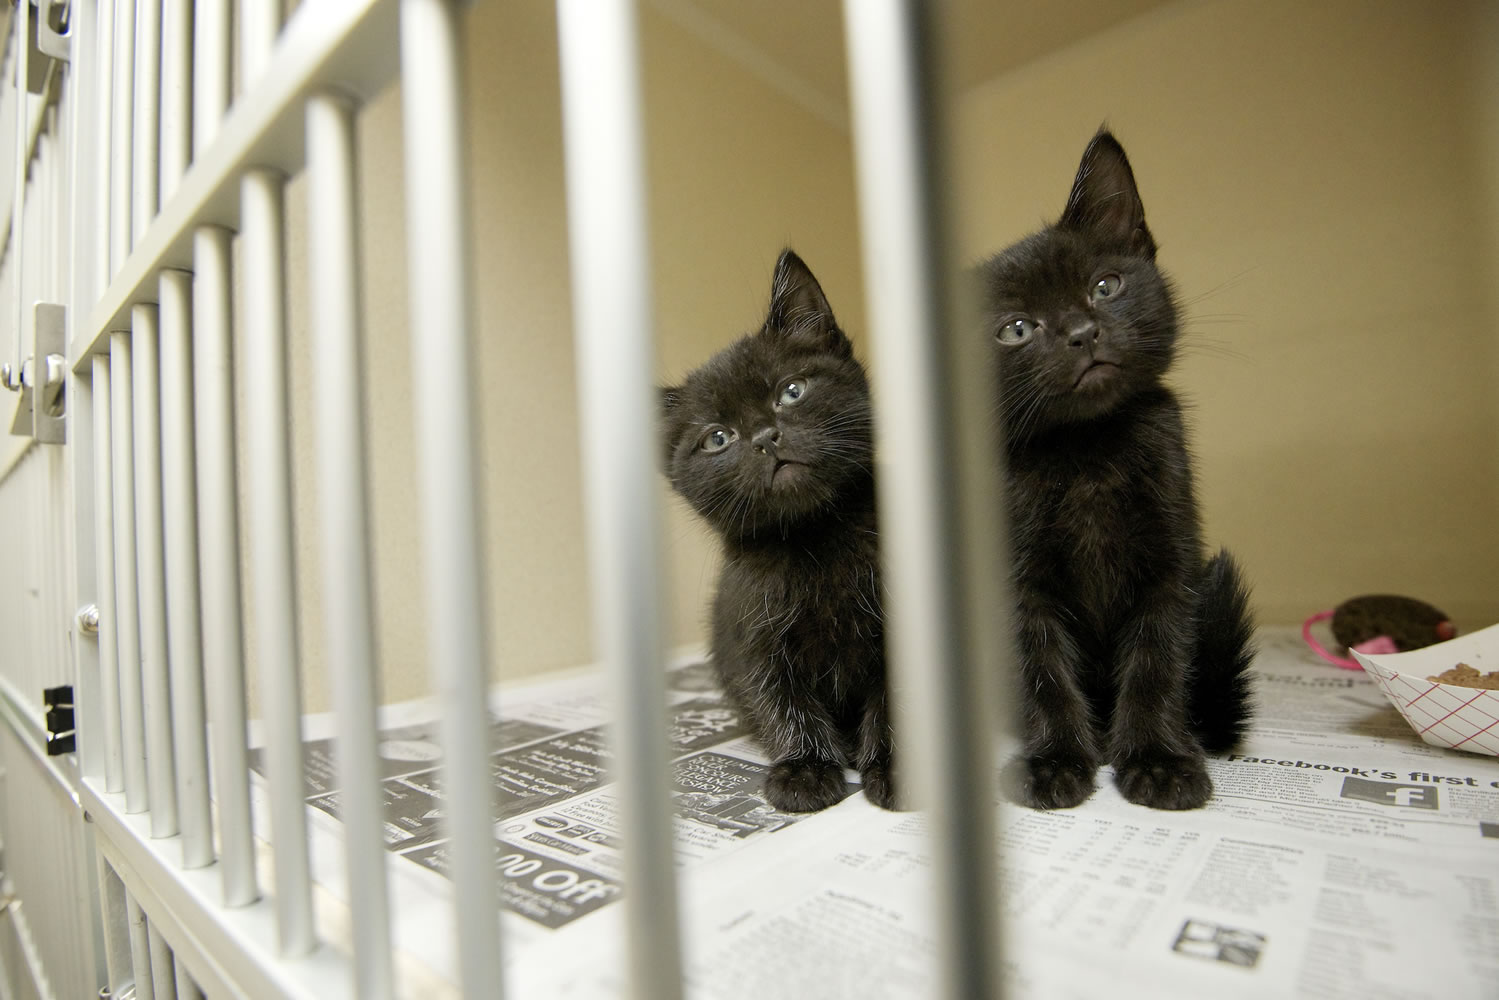 The Humane Society for Southwest Washington will continue the policy introduced earlier this year requiring anyone who needs to drop off a cat or kitten to first make an appointment.